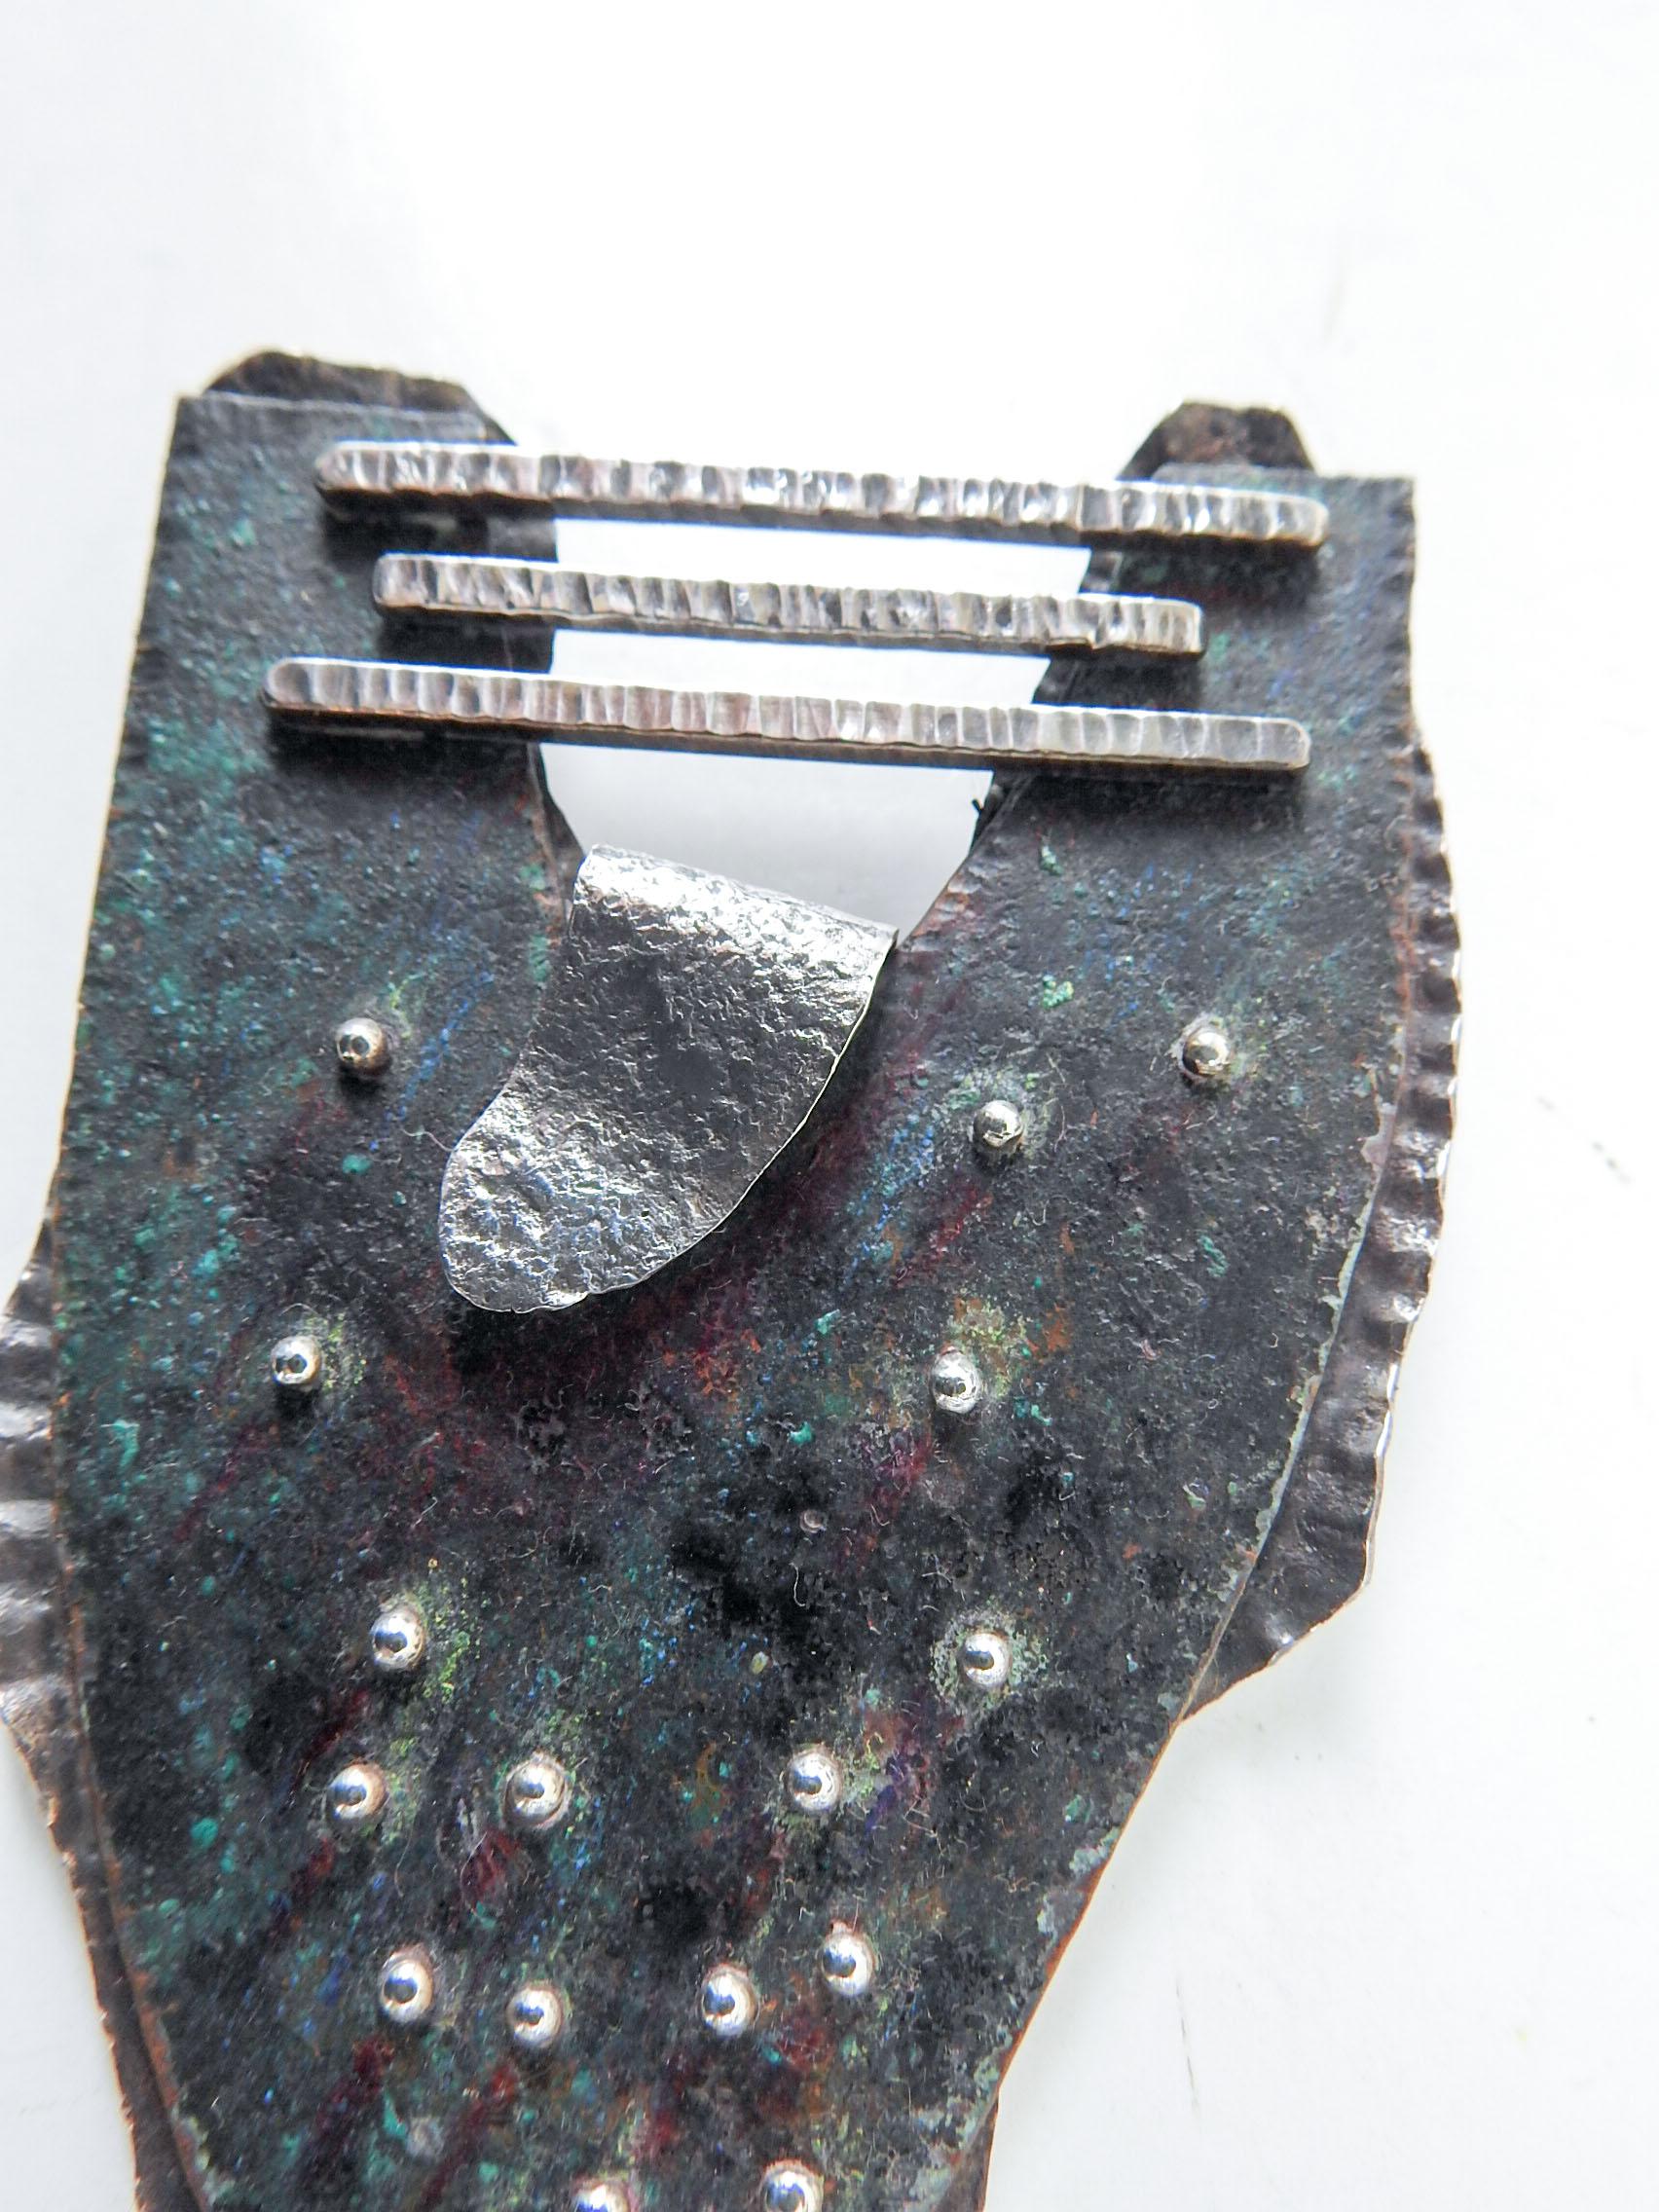 Large sculptural circa 1990's artist made sterling silver and patinated copper brooch. Signed Linda Thompson (20th/21st century). All riveted and hand wrought construction. Dark verdigris textured patina to copper, hammered texture to silver.